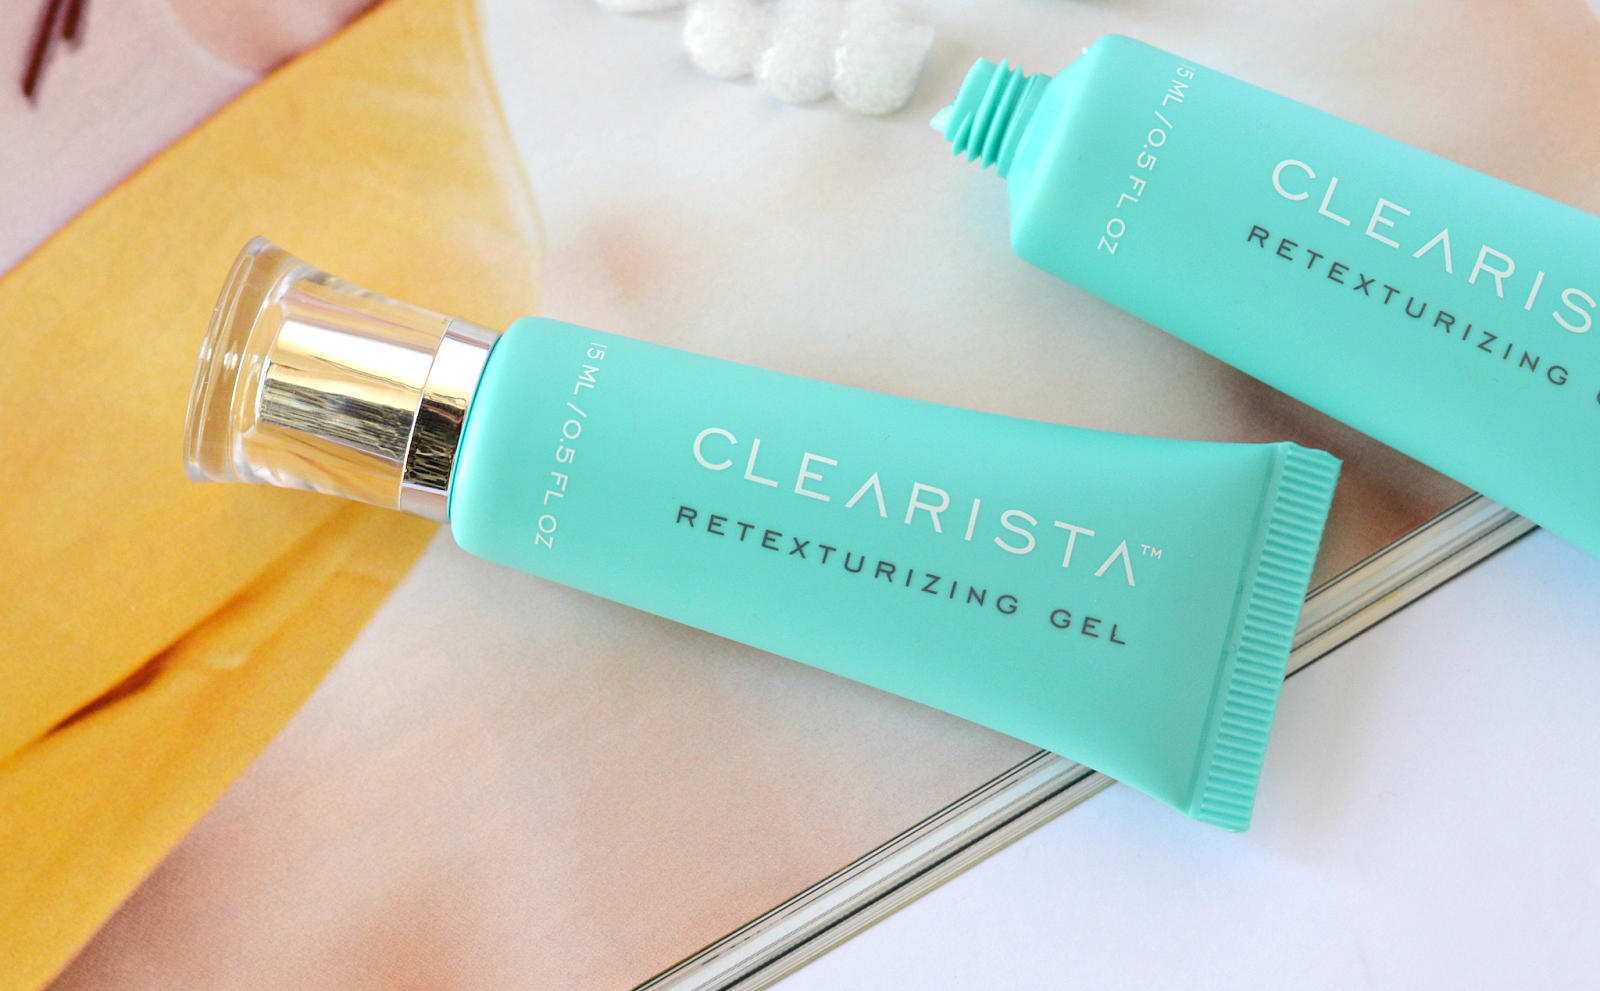 CIA Invests in the Beauty Cream Business to Gather DNA, Not Smooth Over Wrinkles